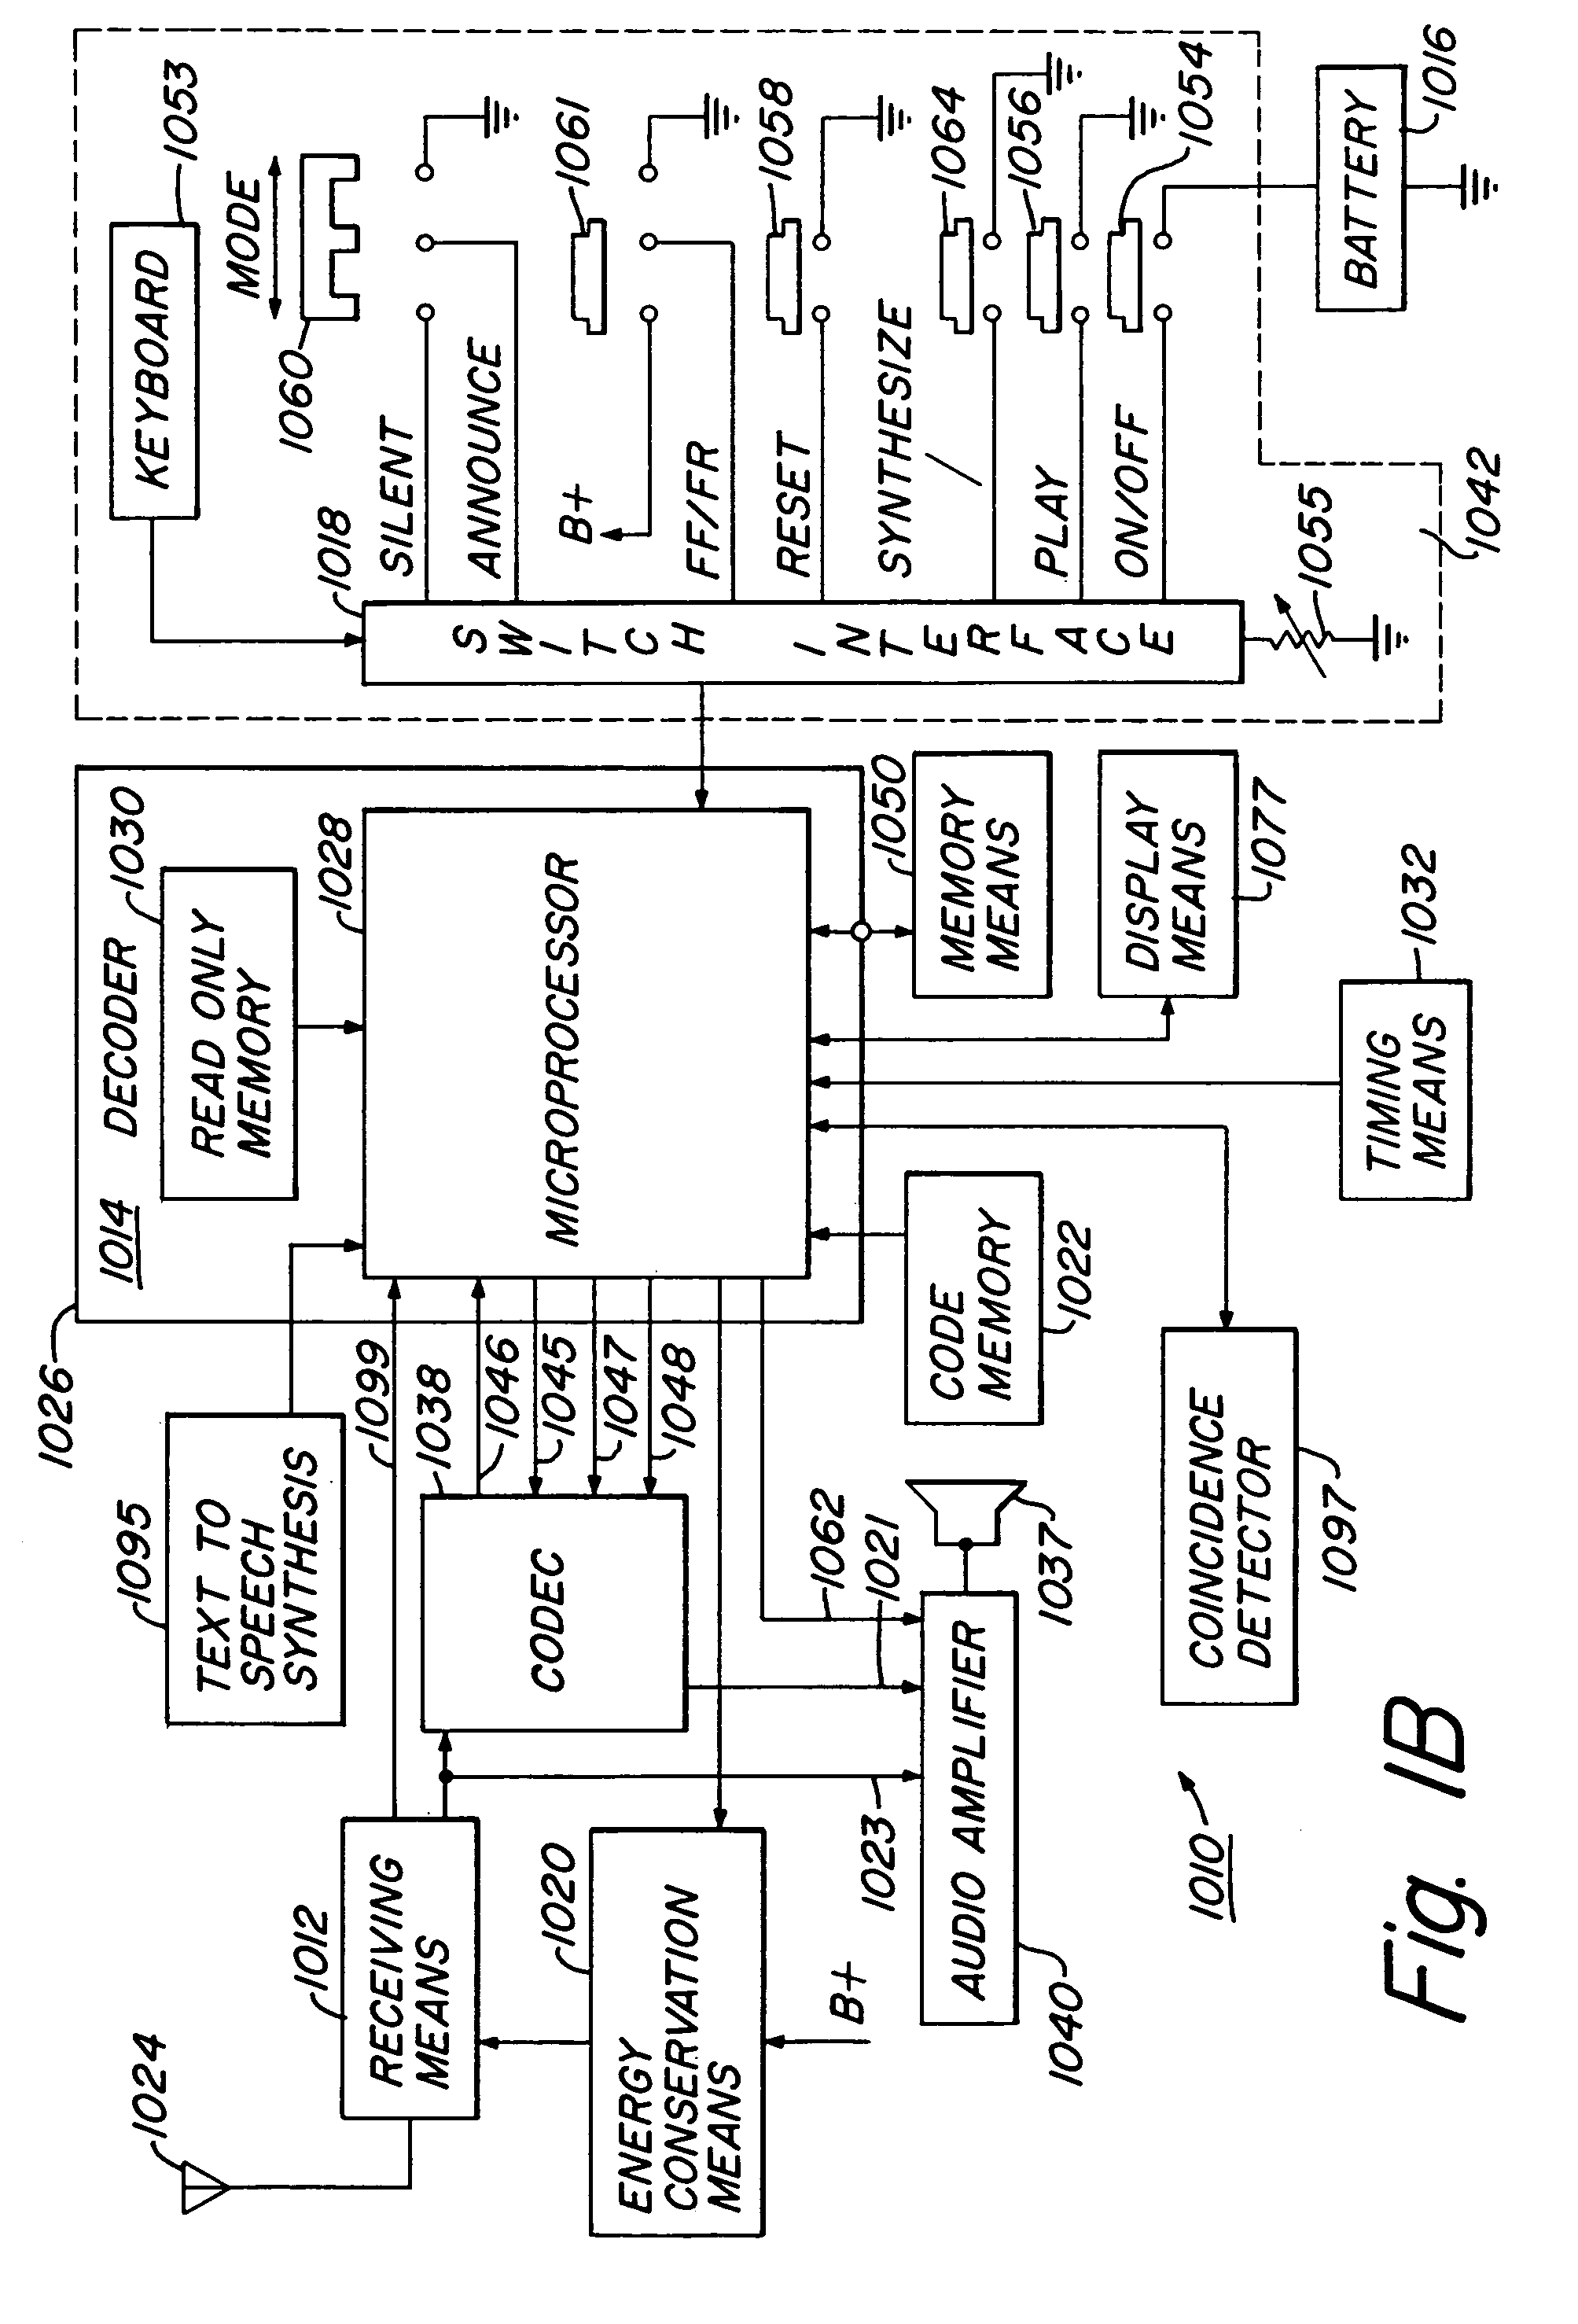 Method and apparatus for improved paging receiver and system